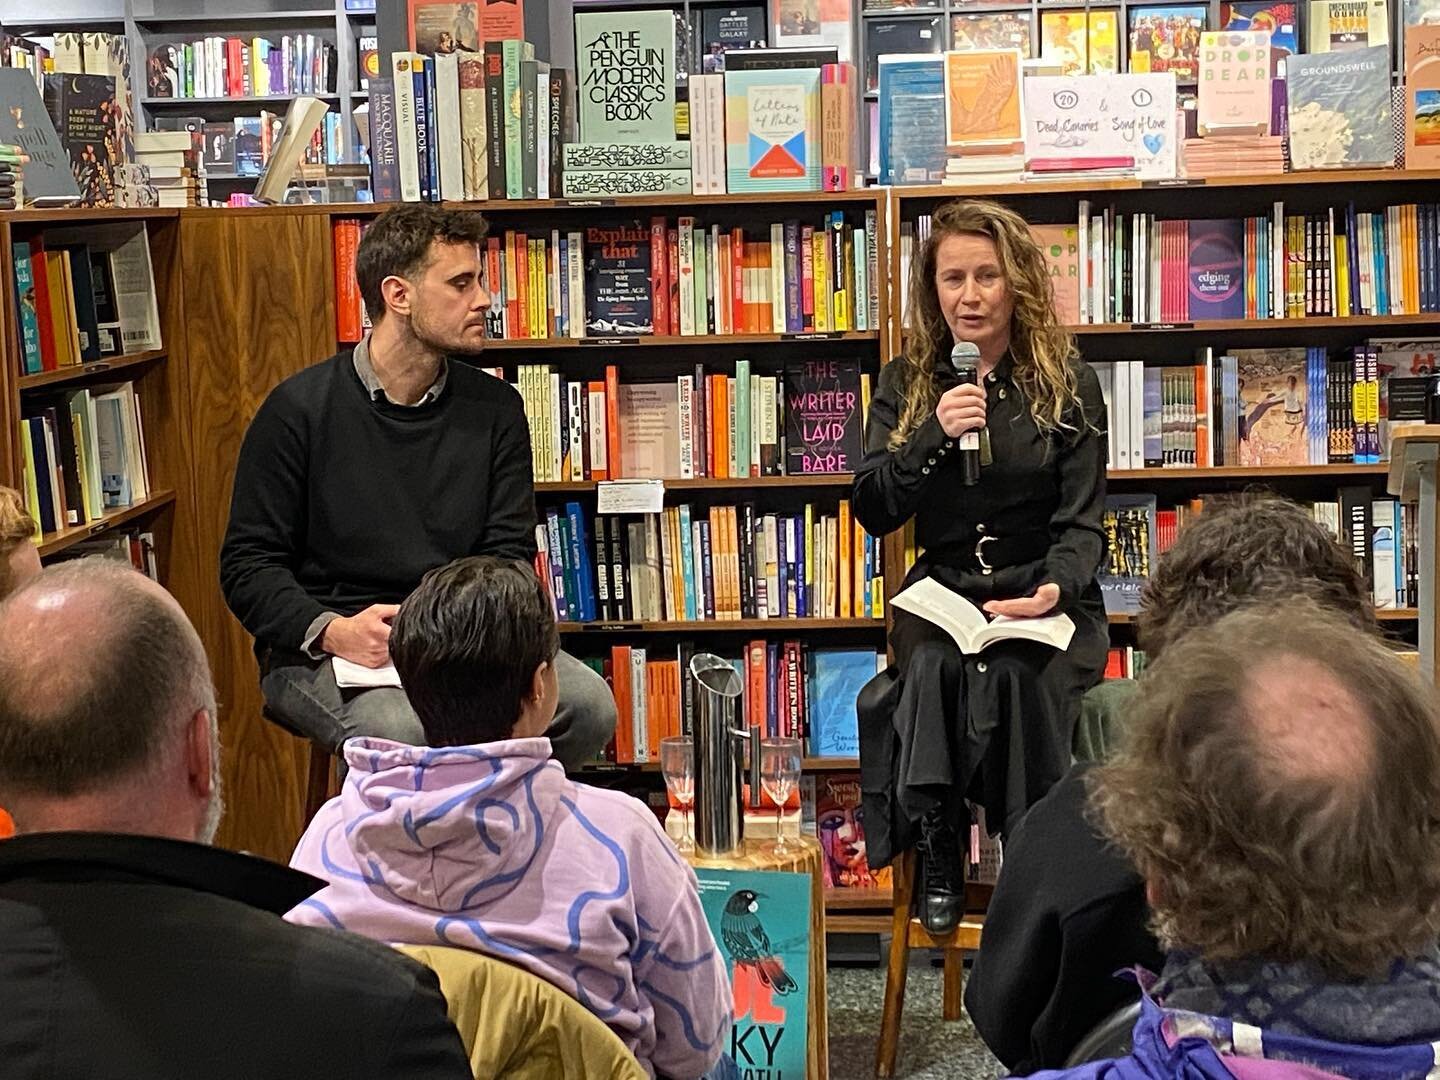 After weeks of post-covid horrors, I&rsquo;m at @readingsbooks Carlton , listening to @bexmana reading from her brilliant Au&eacute;. In conversation with @jppomare